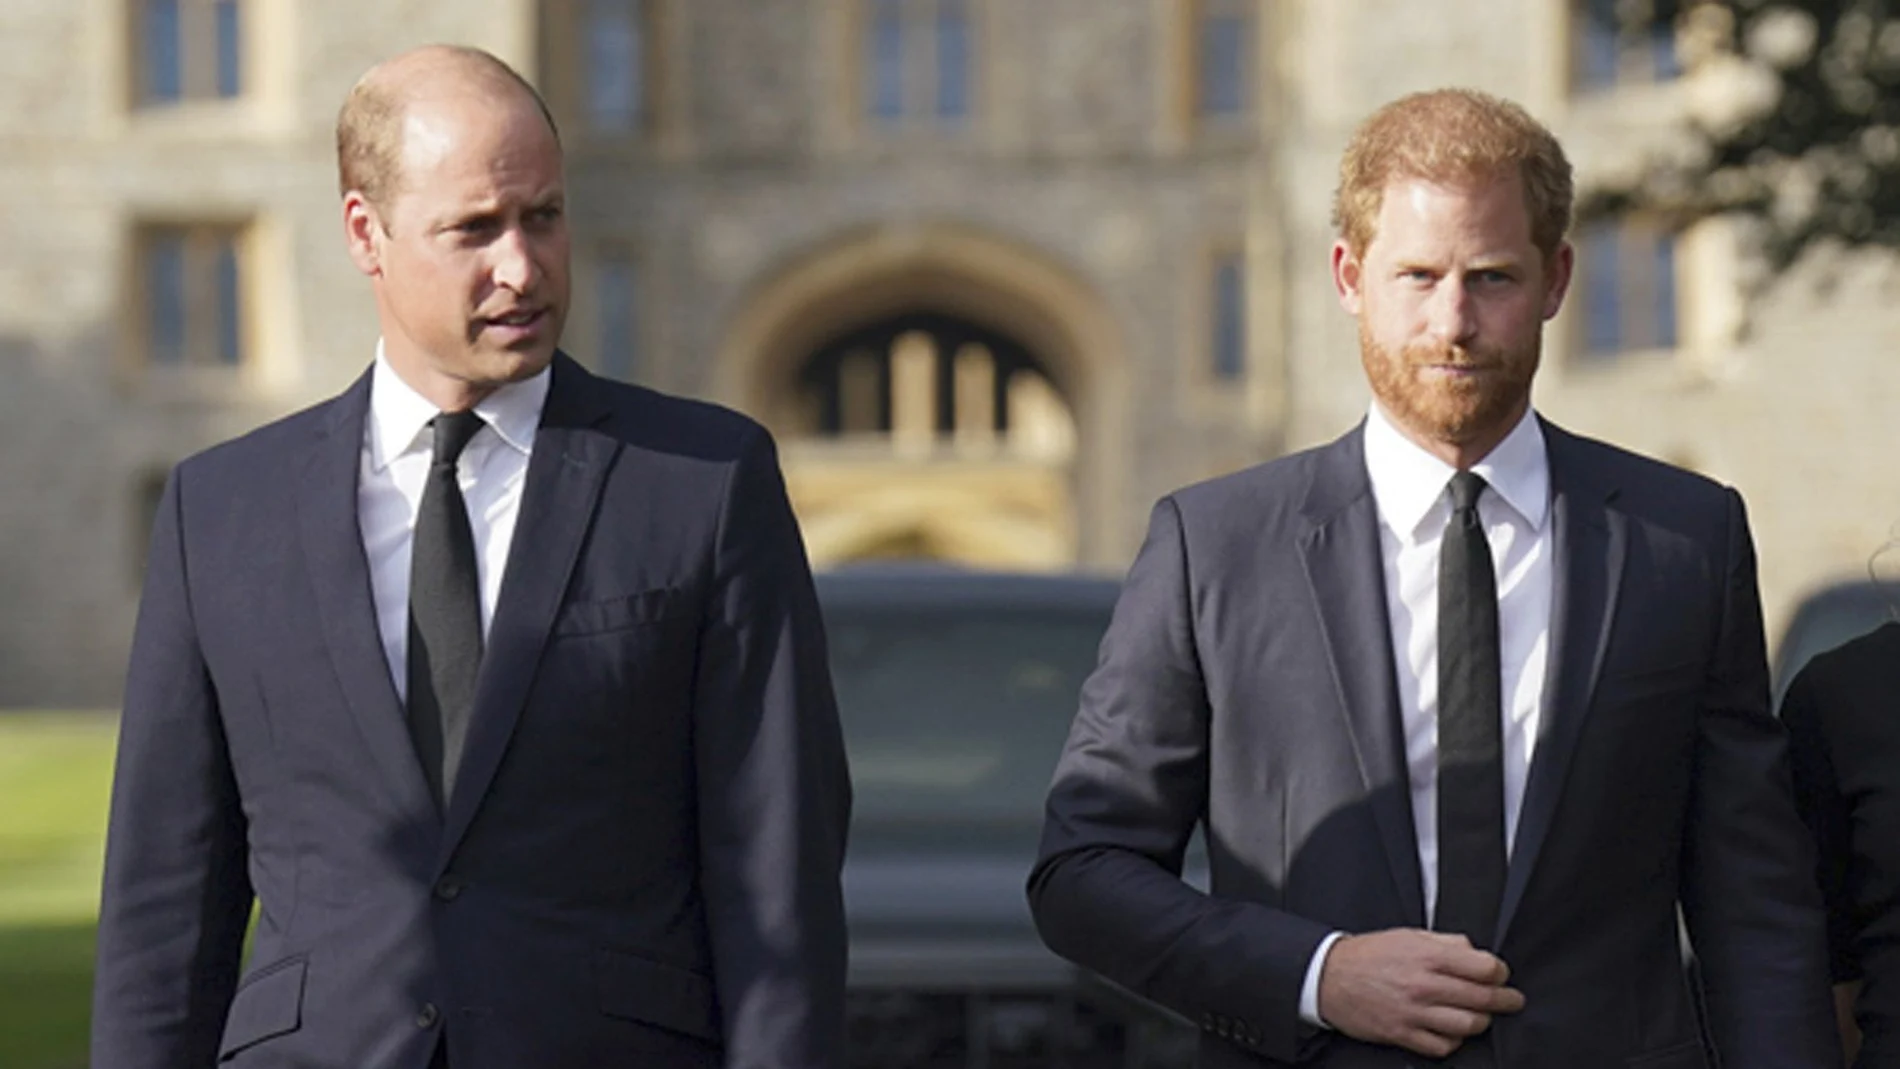 Britain's Prince William, Prince of Wales, left and Prince Harry walk to meet members of the public at Windsor Castle, following the death of Queen Elizabeth II 